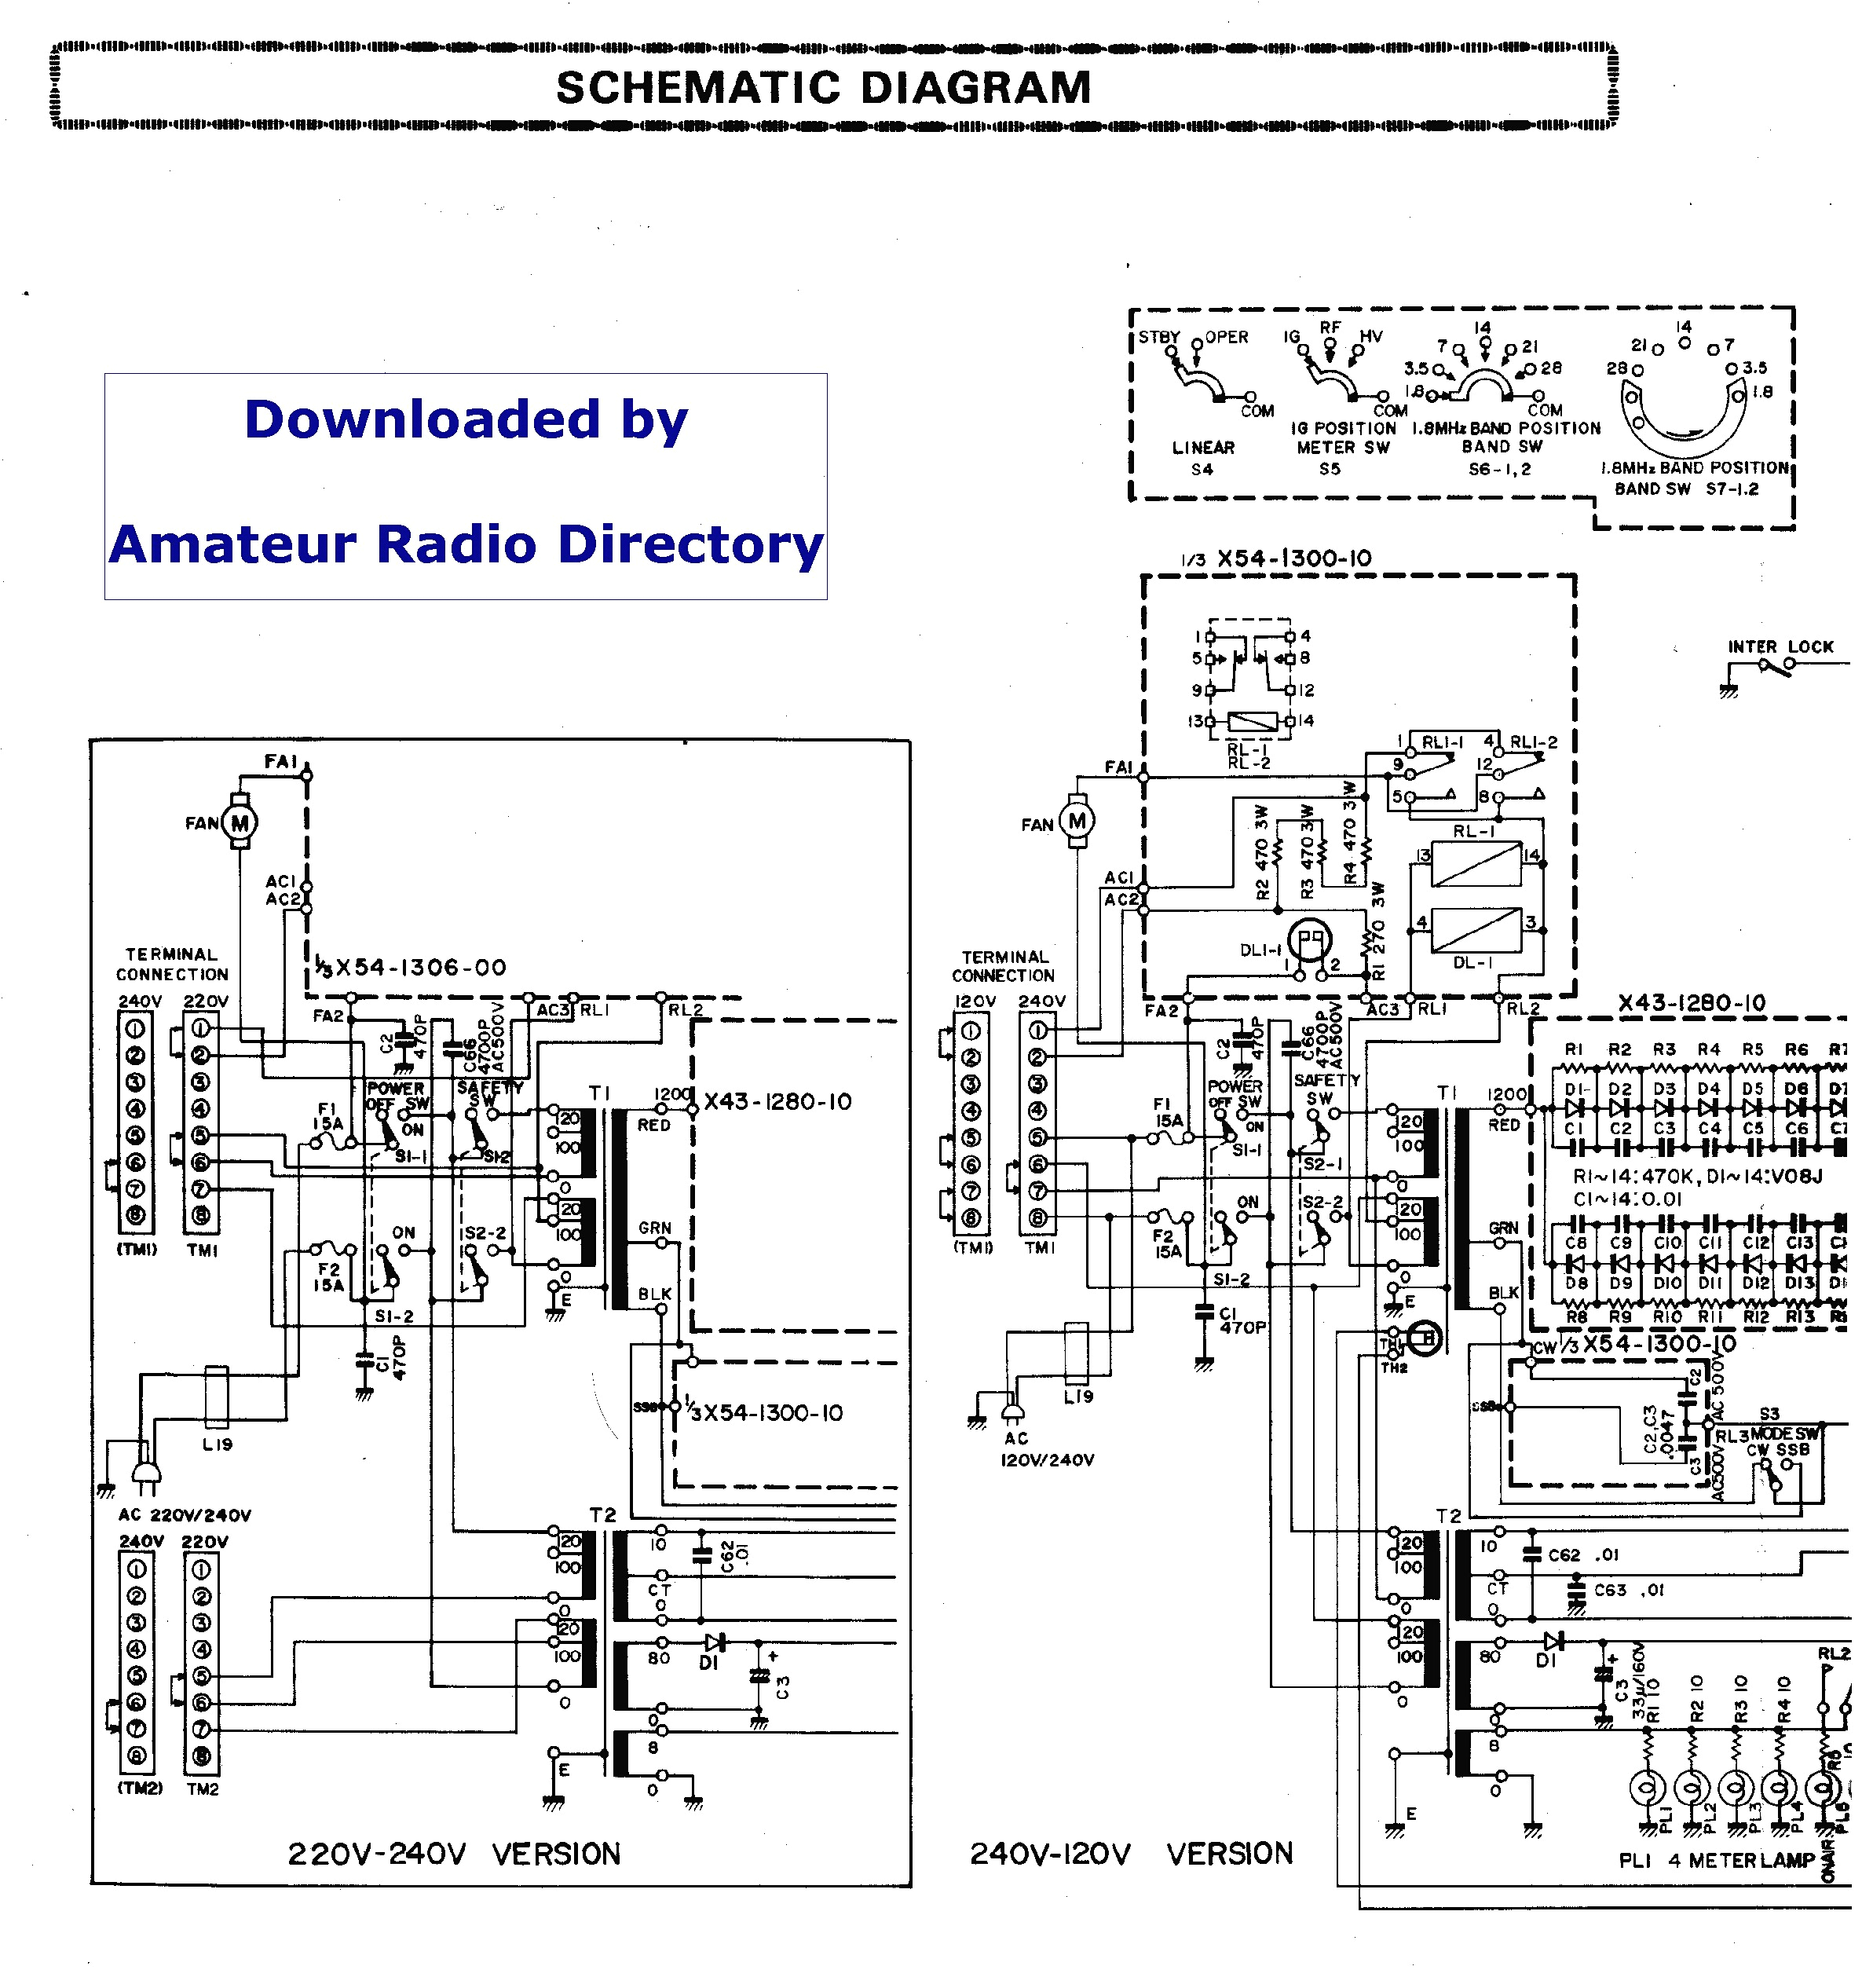 autopage rs 727 wiring diagram wiring diagram insidewiring methods for lighting circuits1017 wiring diagram home autopage